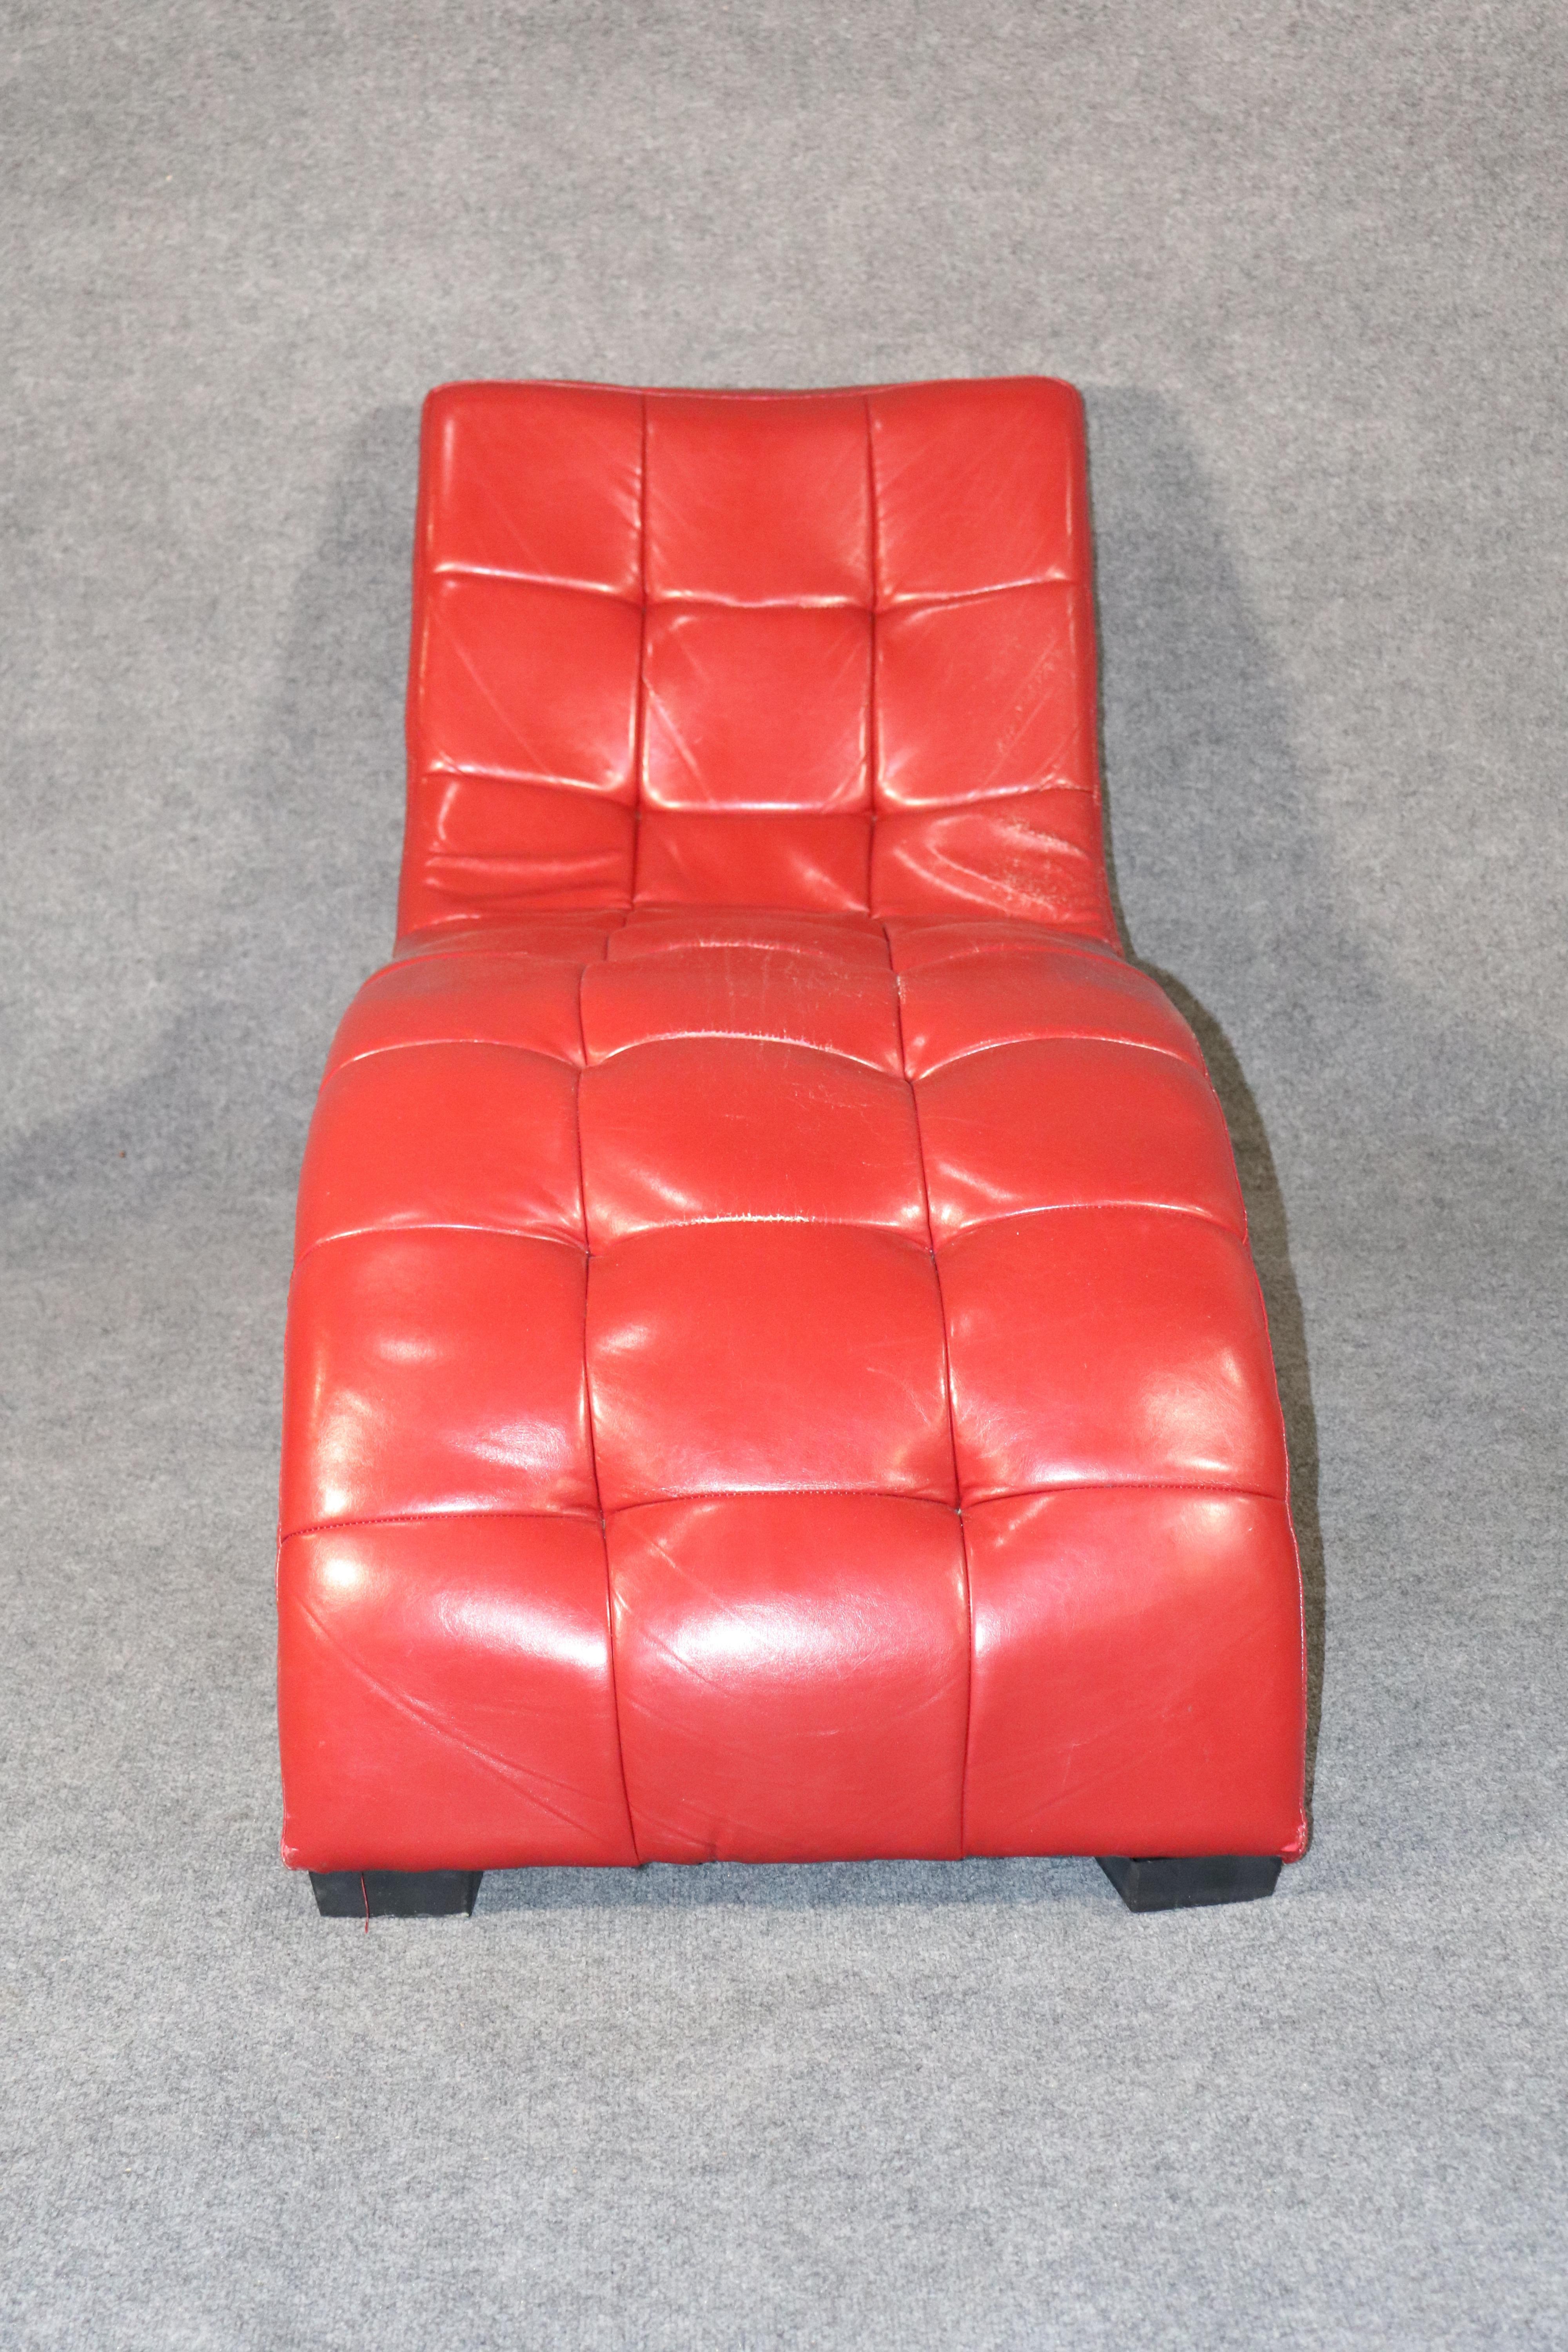 Chaise lounge chair with tufted leather upholstery. Attractive wave shape design with wood legs.
Please confirm location